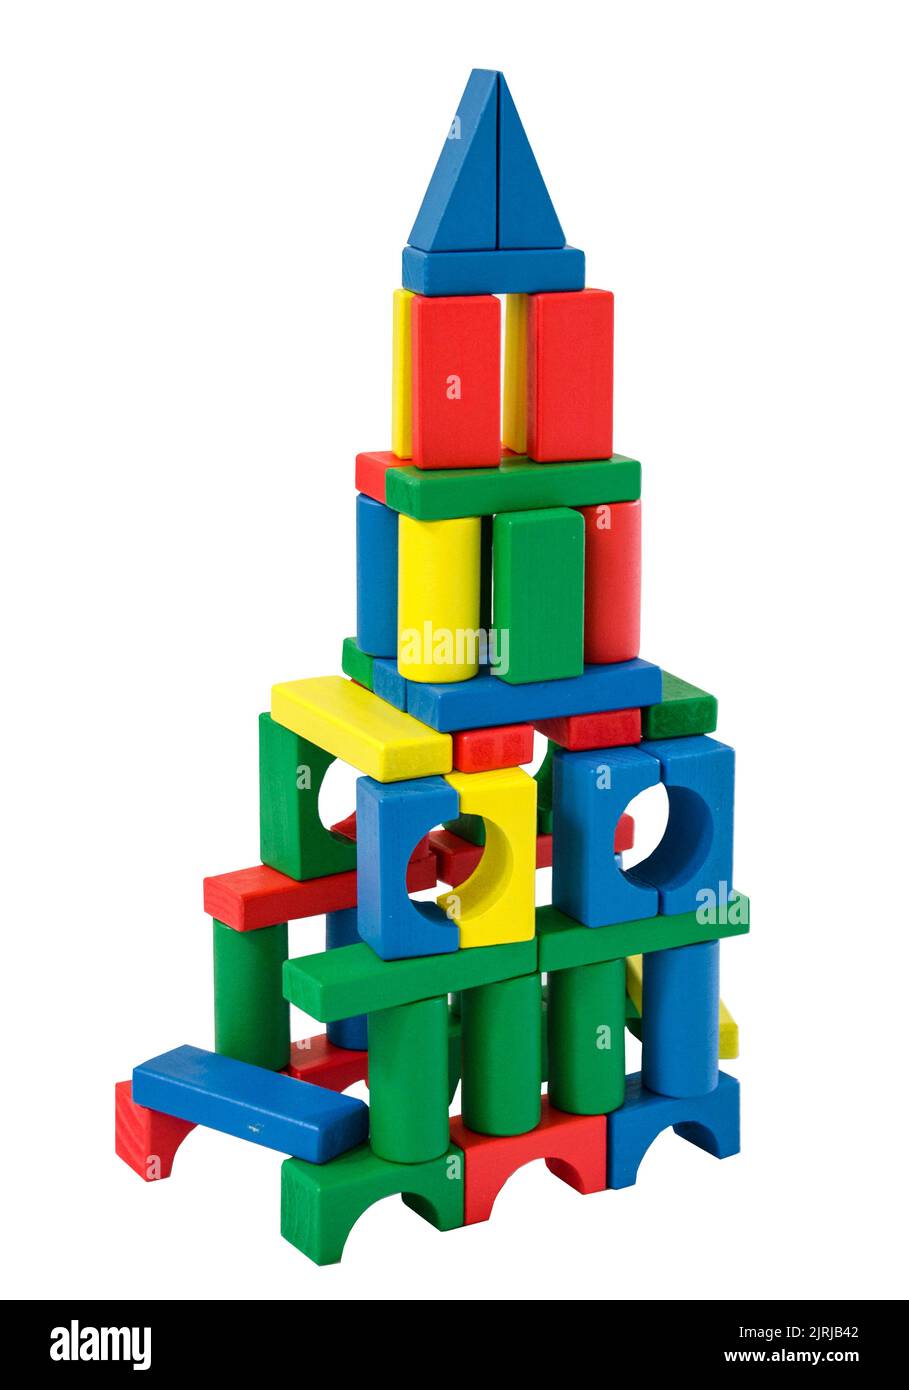 child's version of a turreted house or space station made of coloured wooden building blocks on white backdrop Stock Photo